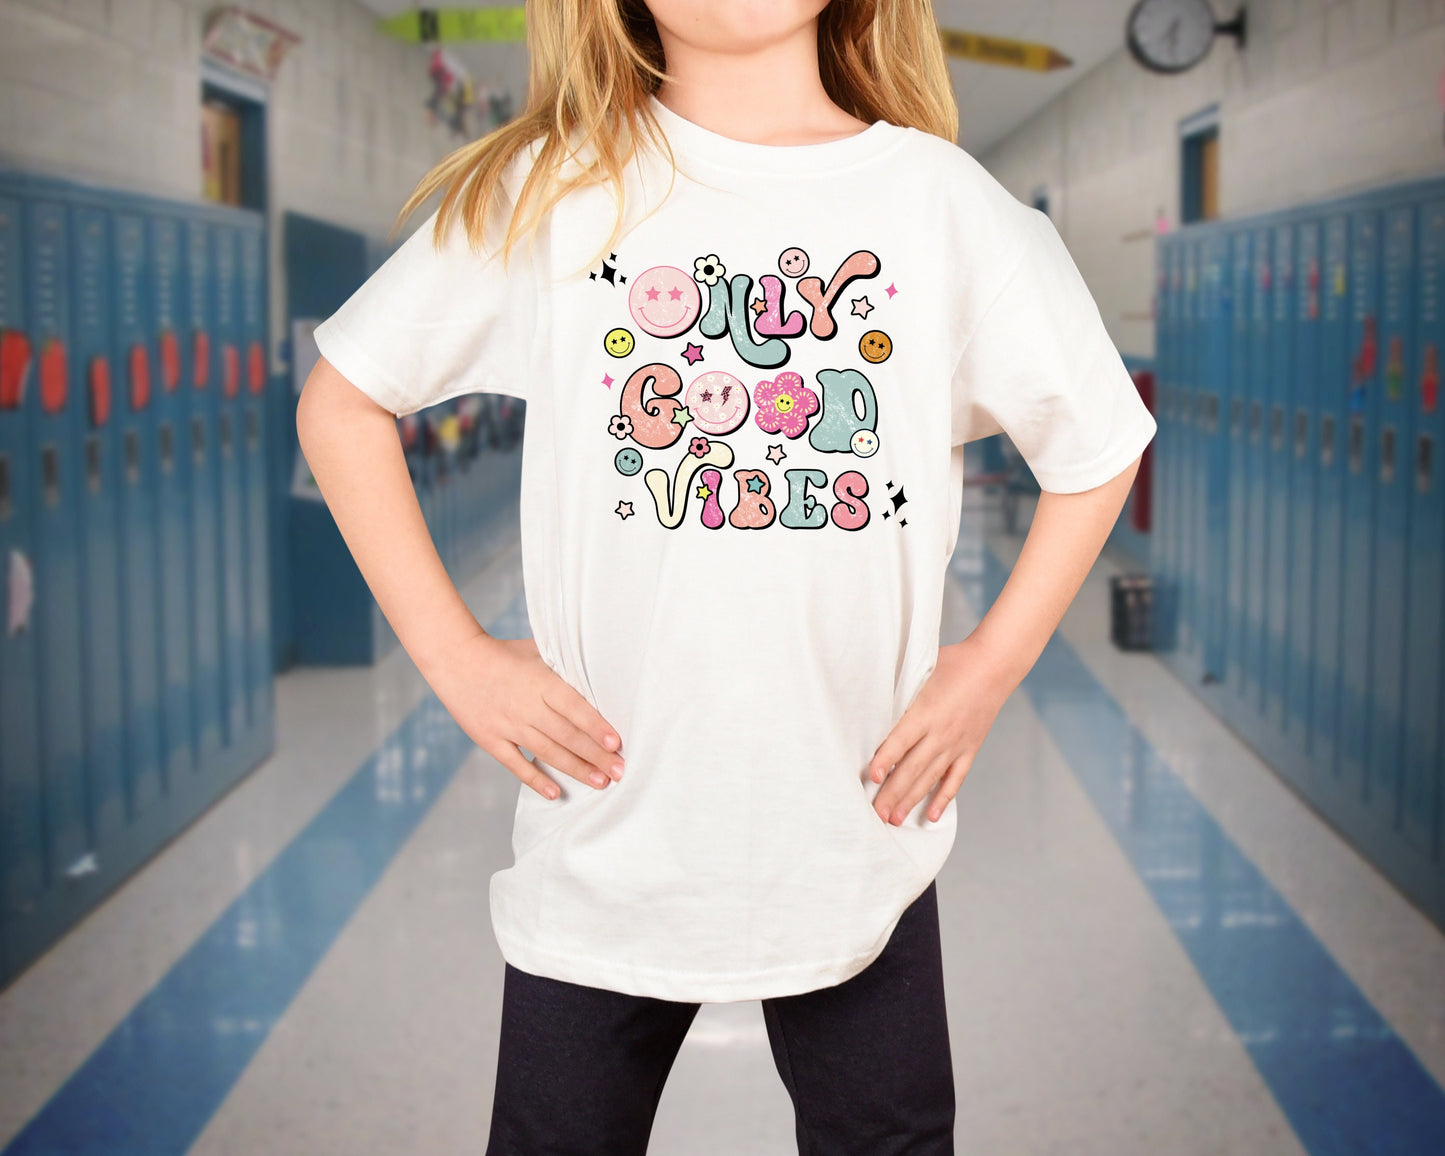 Good Vibes Only Youth Shirt, Good Vibes Graphic Tee, First Day of School Shirt, Back to School Shirt, Girl's School Shirt, Smiley Face Shirt